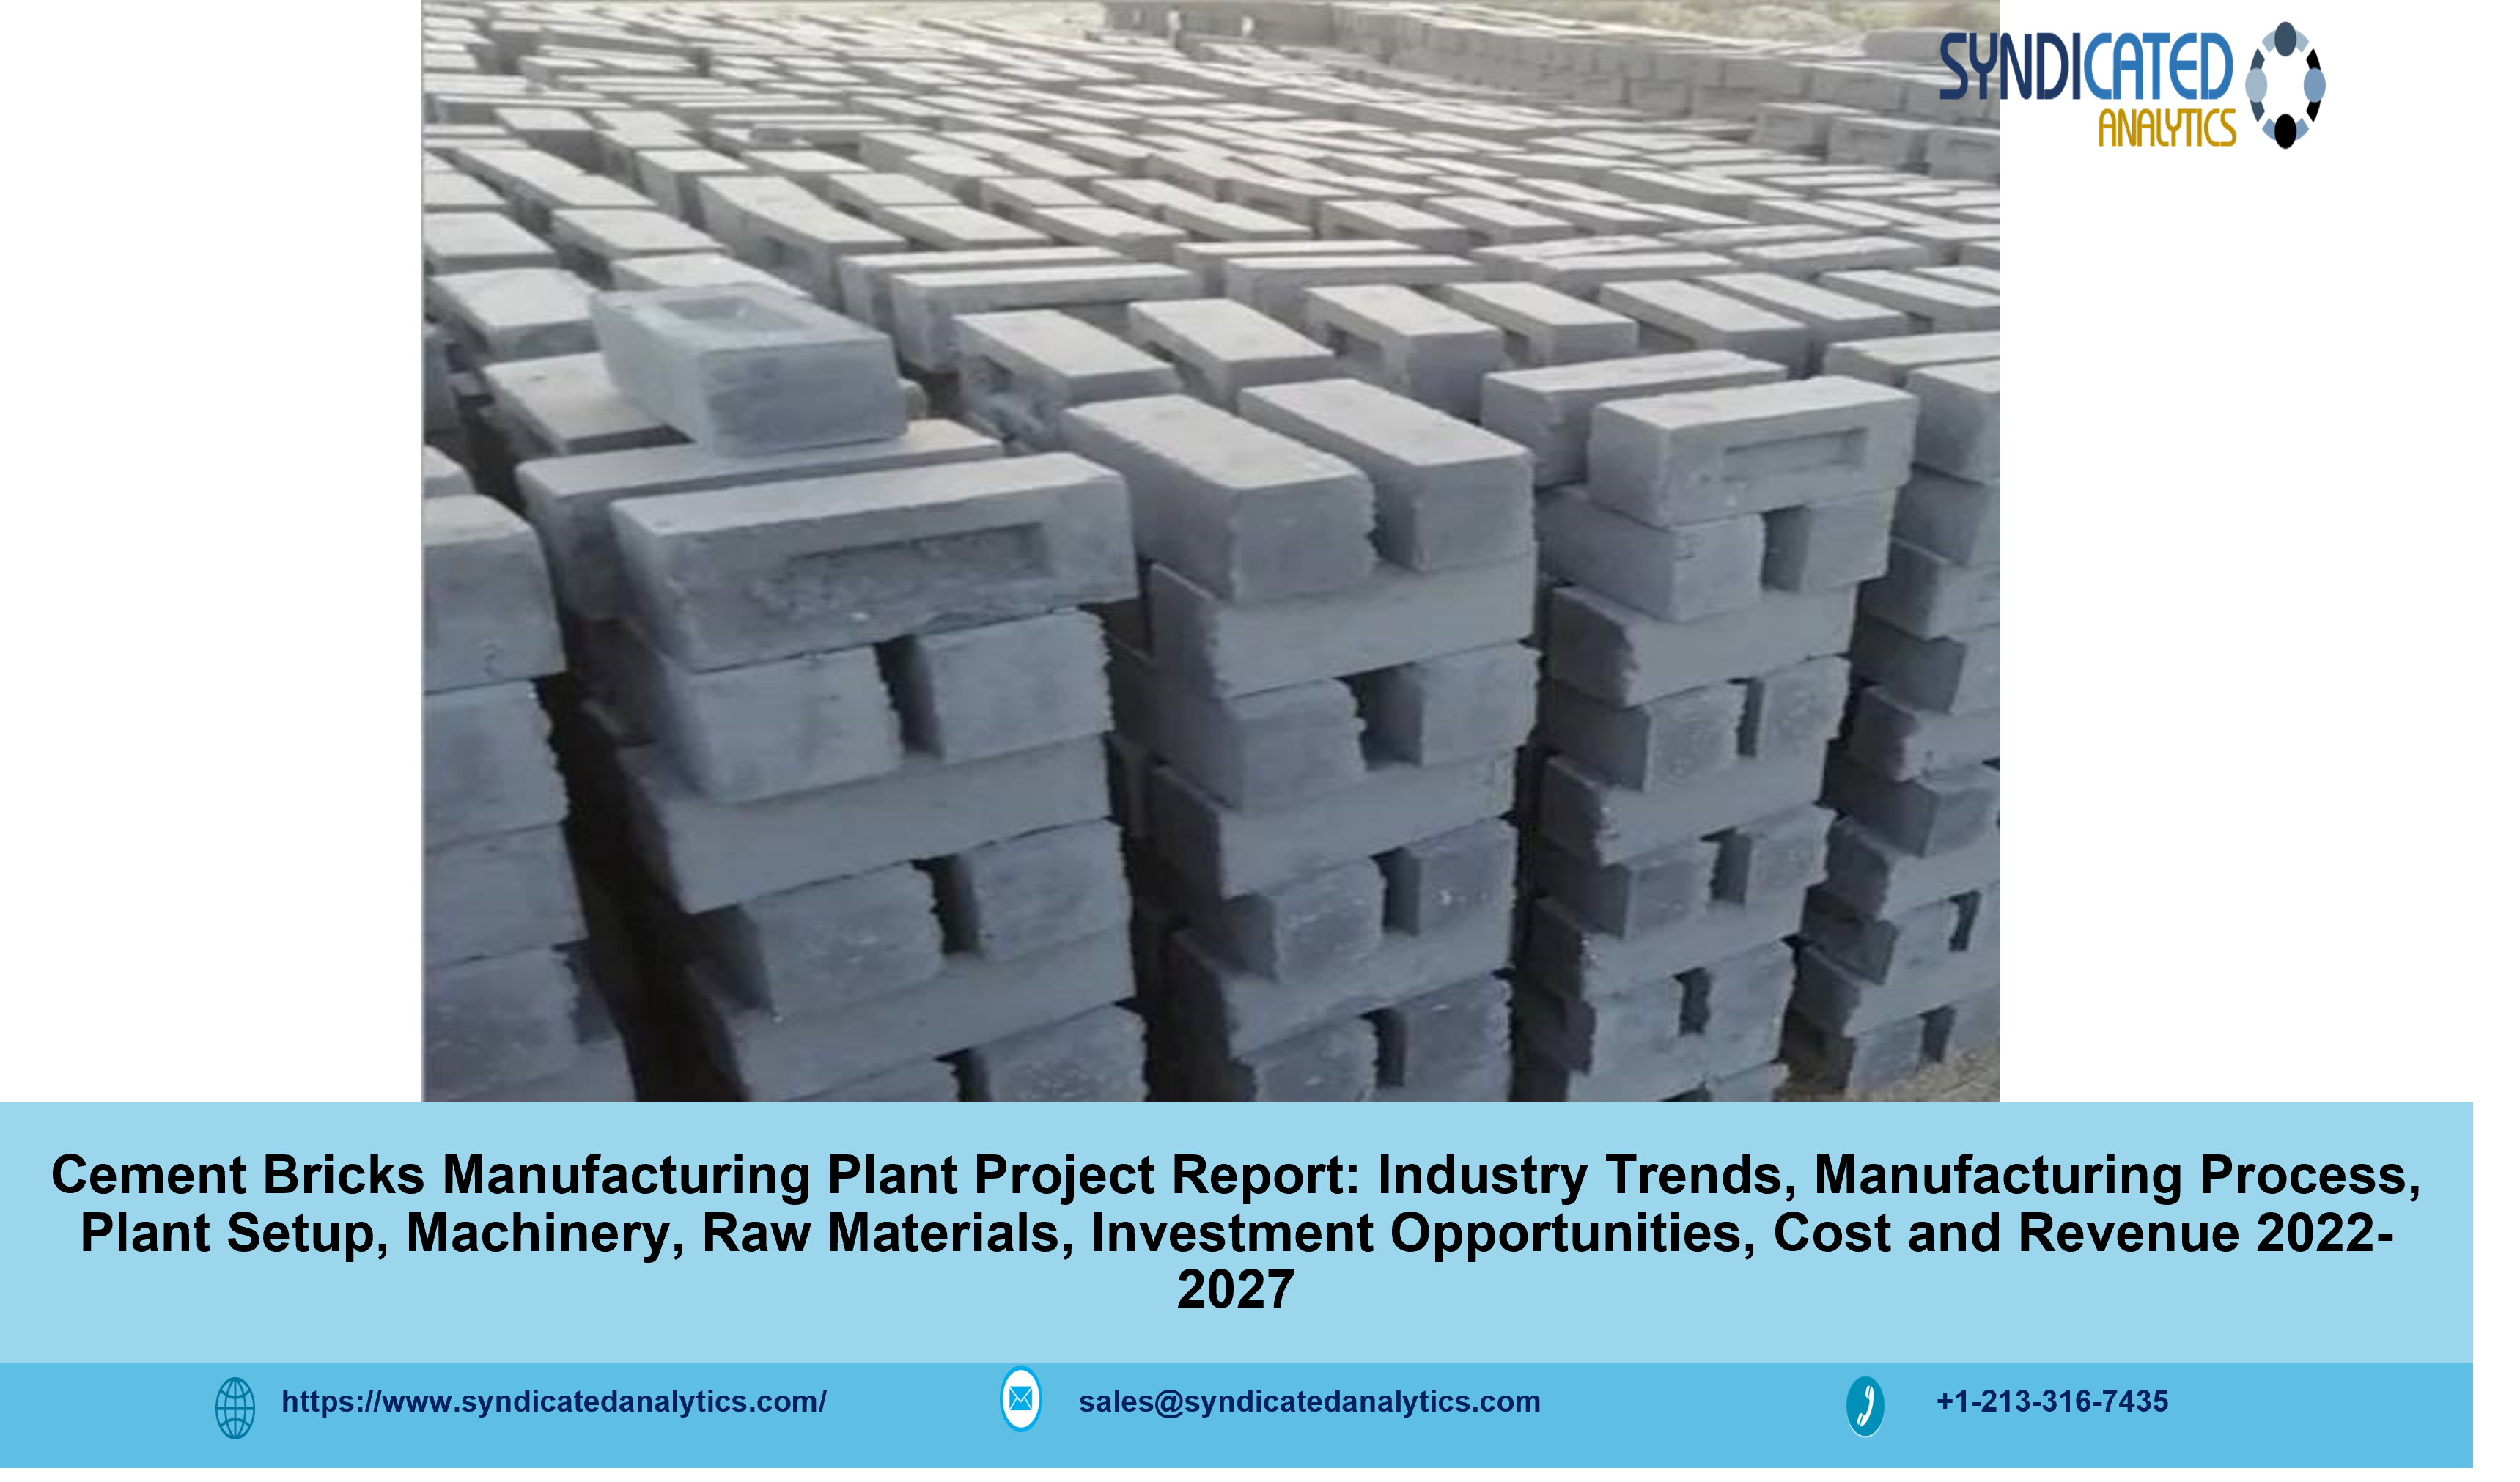 Cement Bricks Industry Project Report